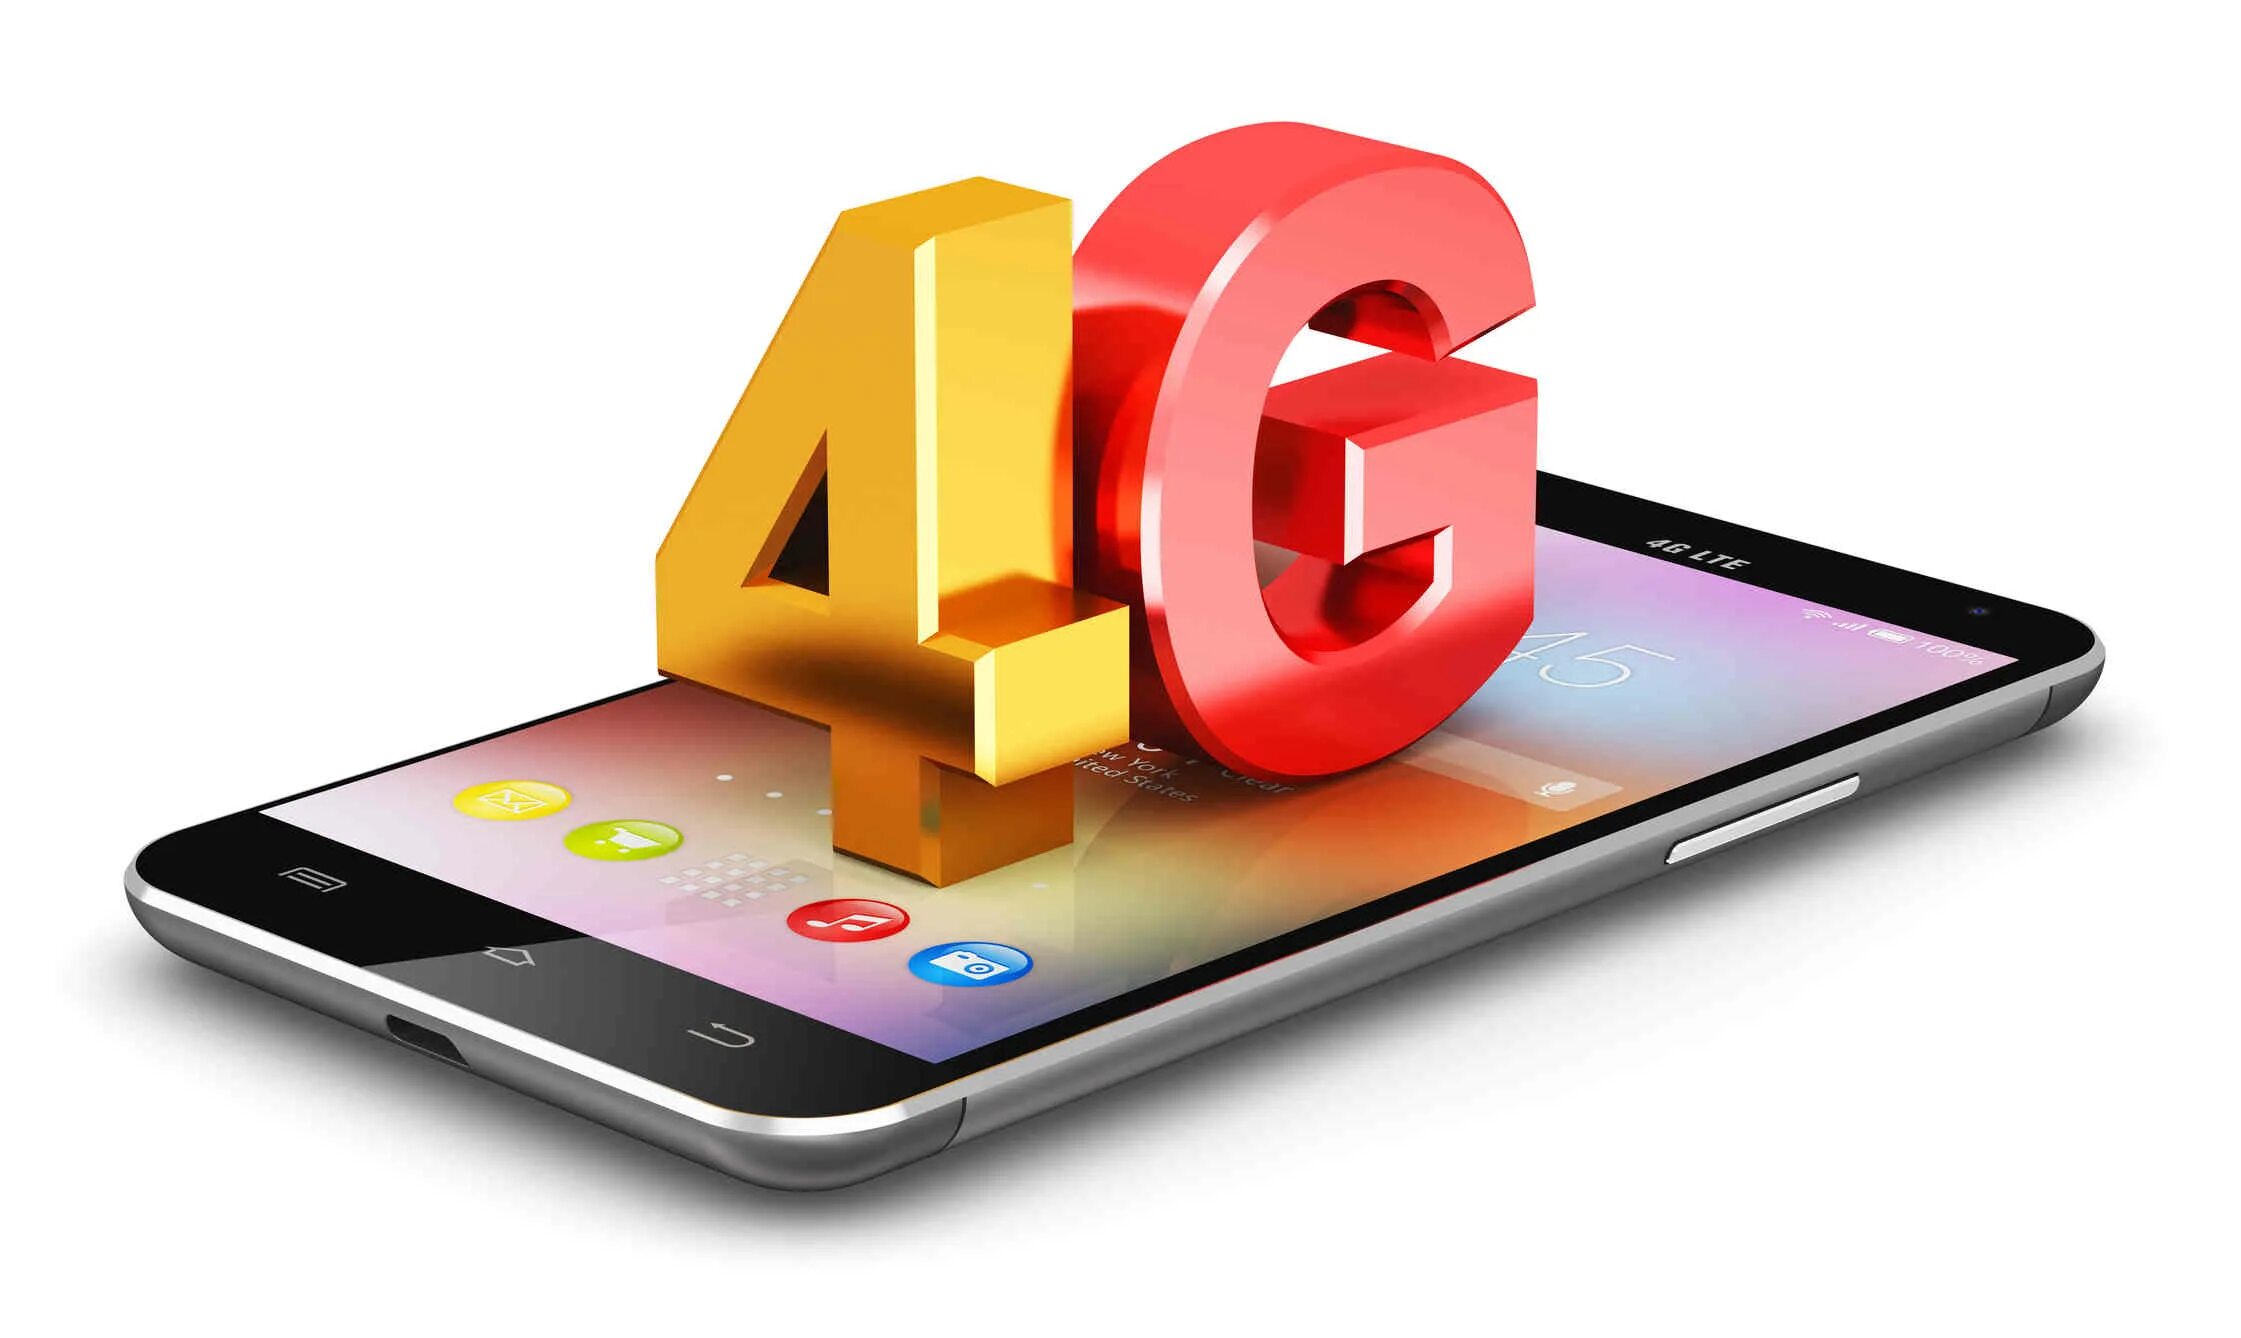 4g LTE telephone Portable. Ноутбук с 4g LTE. Телефон аксессуары PNG. 4g LTE device mobile your personal communication.